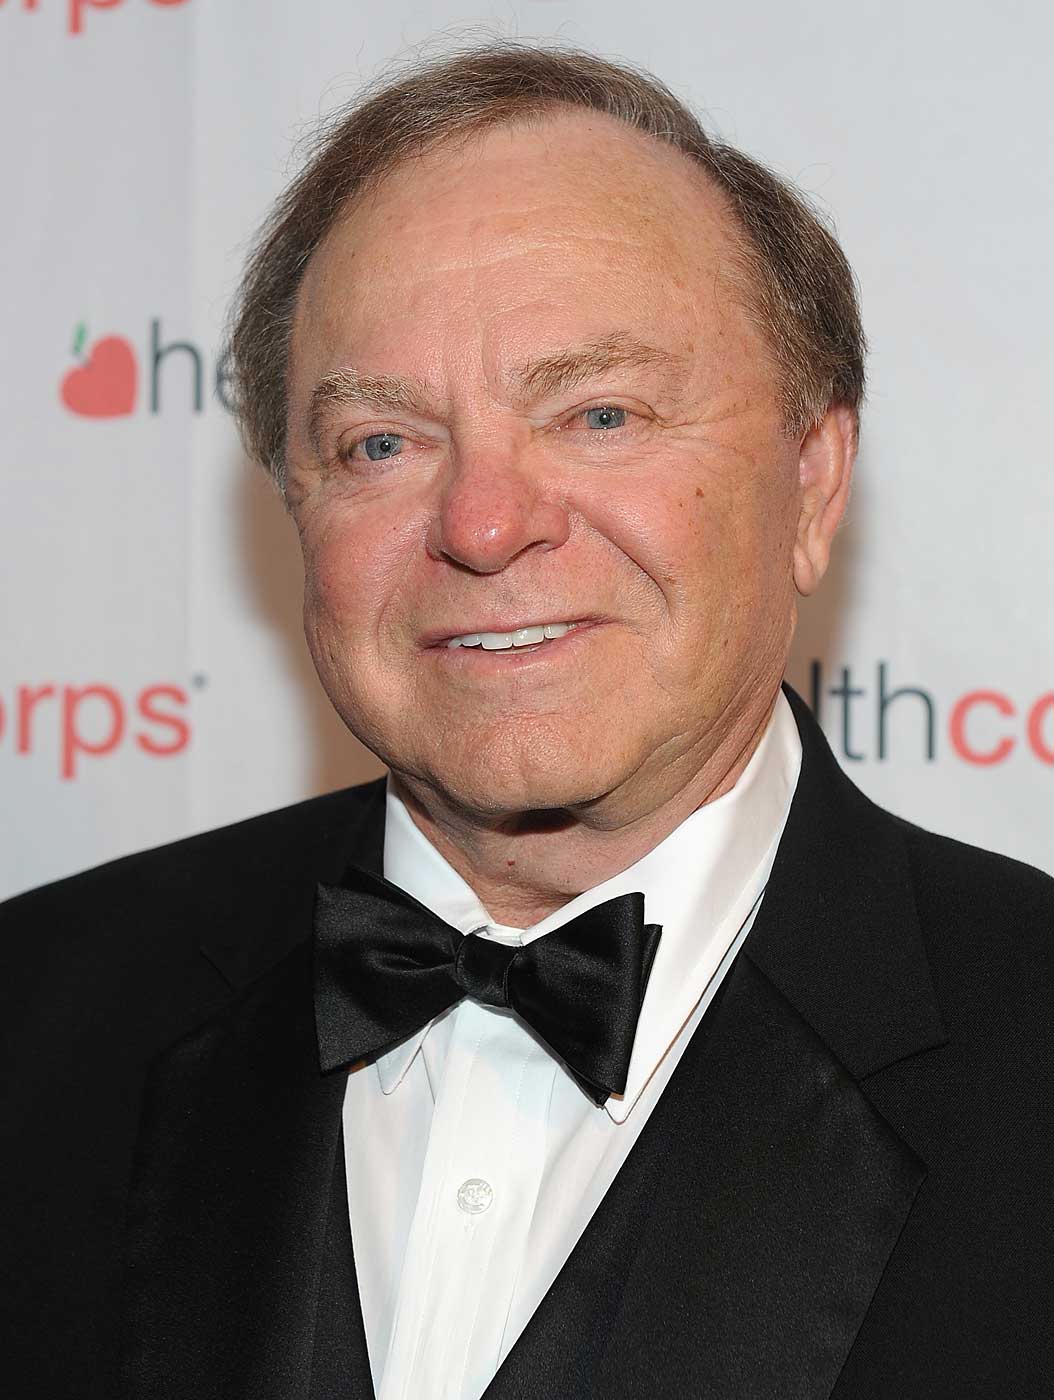 Harold Hamm, CEO of Continental Resources, attends the 7th Annual Heath Corps Grassroots Garden Gala at Gotham Hall on April 17, 2013 in New York City. (Brad Barket—Getty Images)